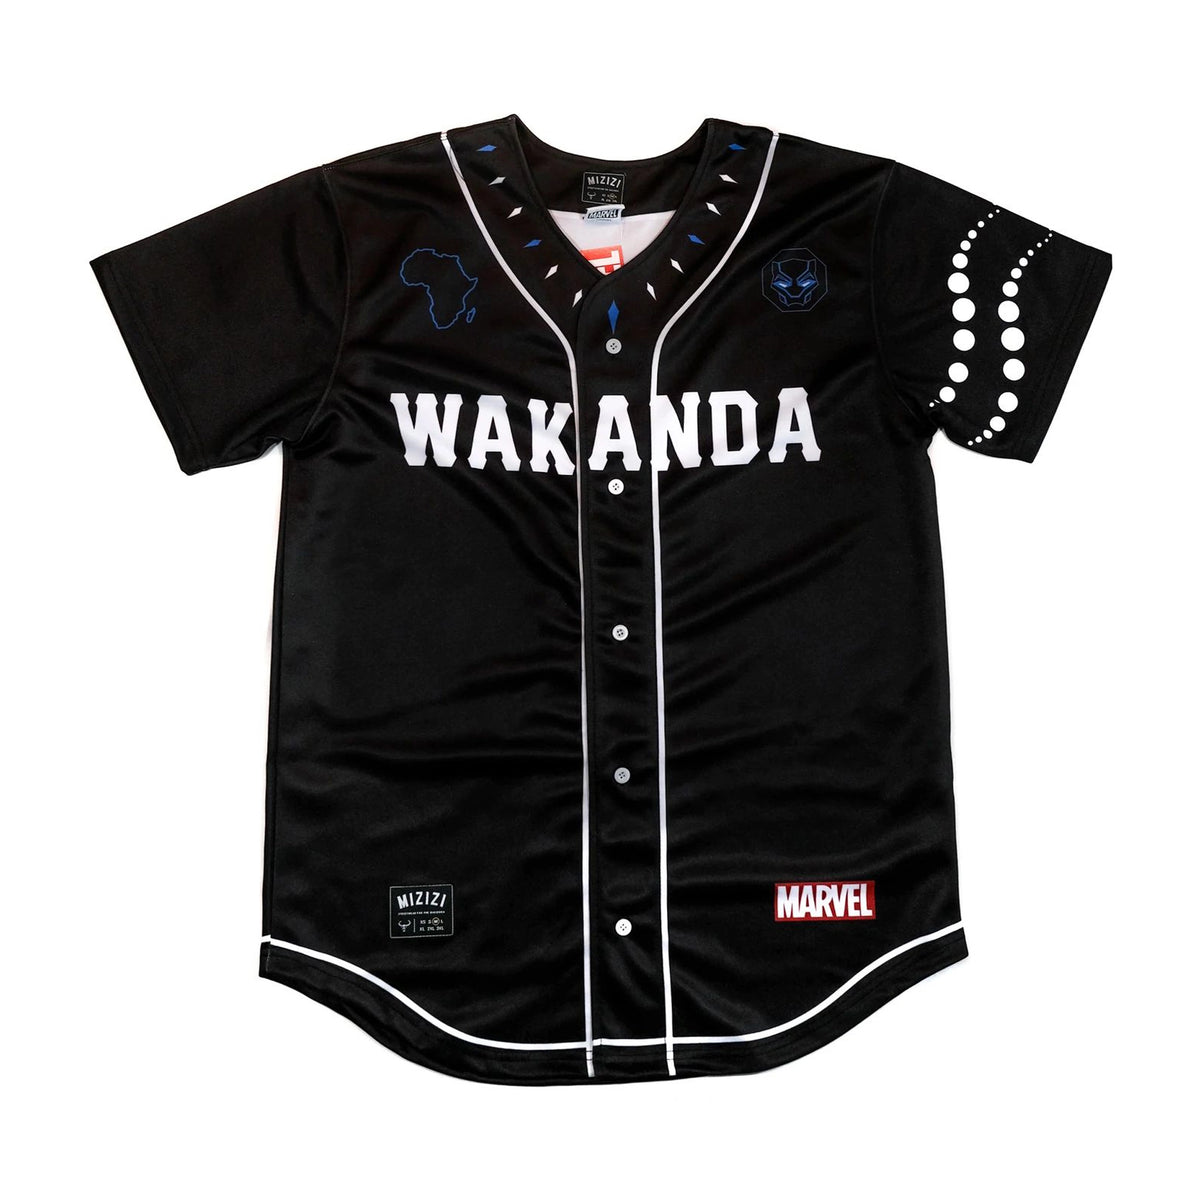 Wakanda Forever Black Panther Baseball Jersey for Sale in Port